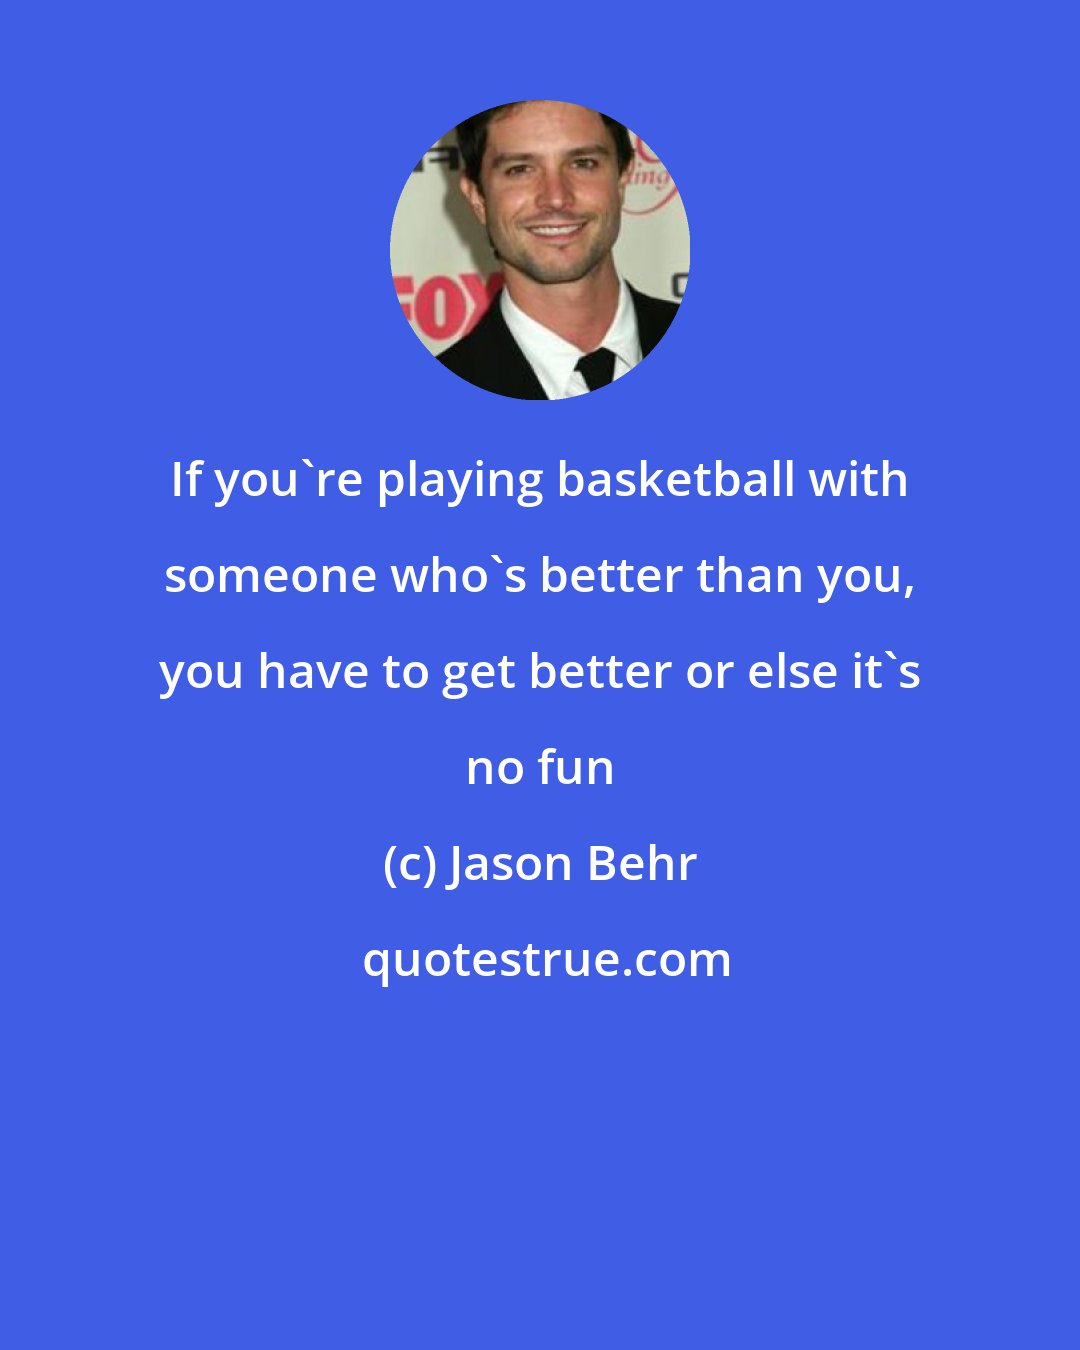 Jason Behr: If you're playing basketball with someone who's better than you, you have to get better or else it's no fun